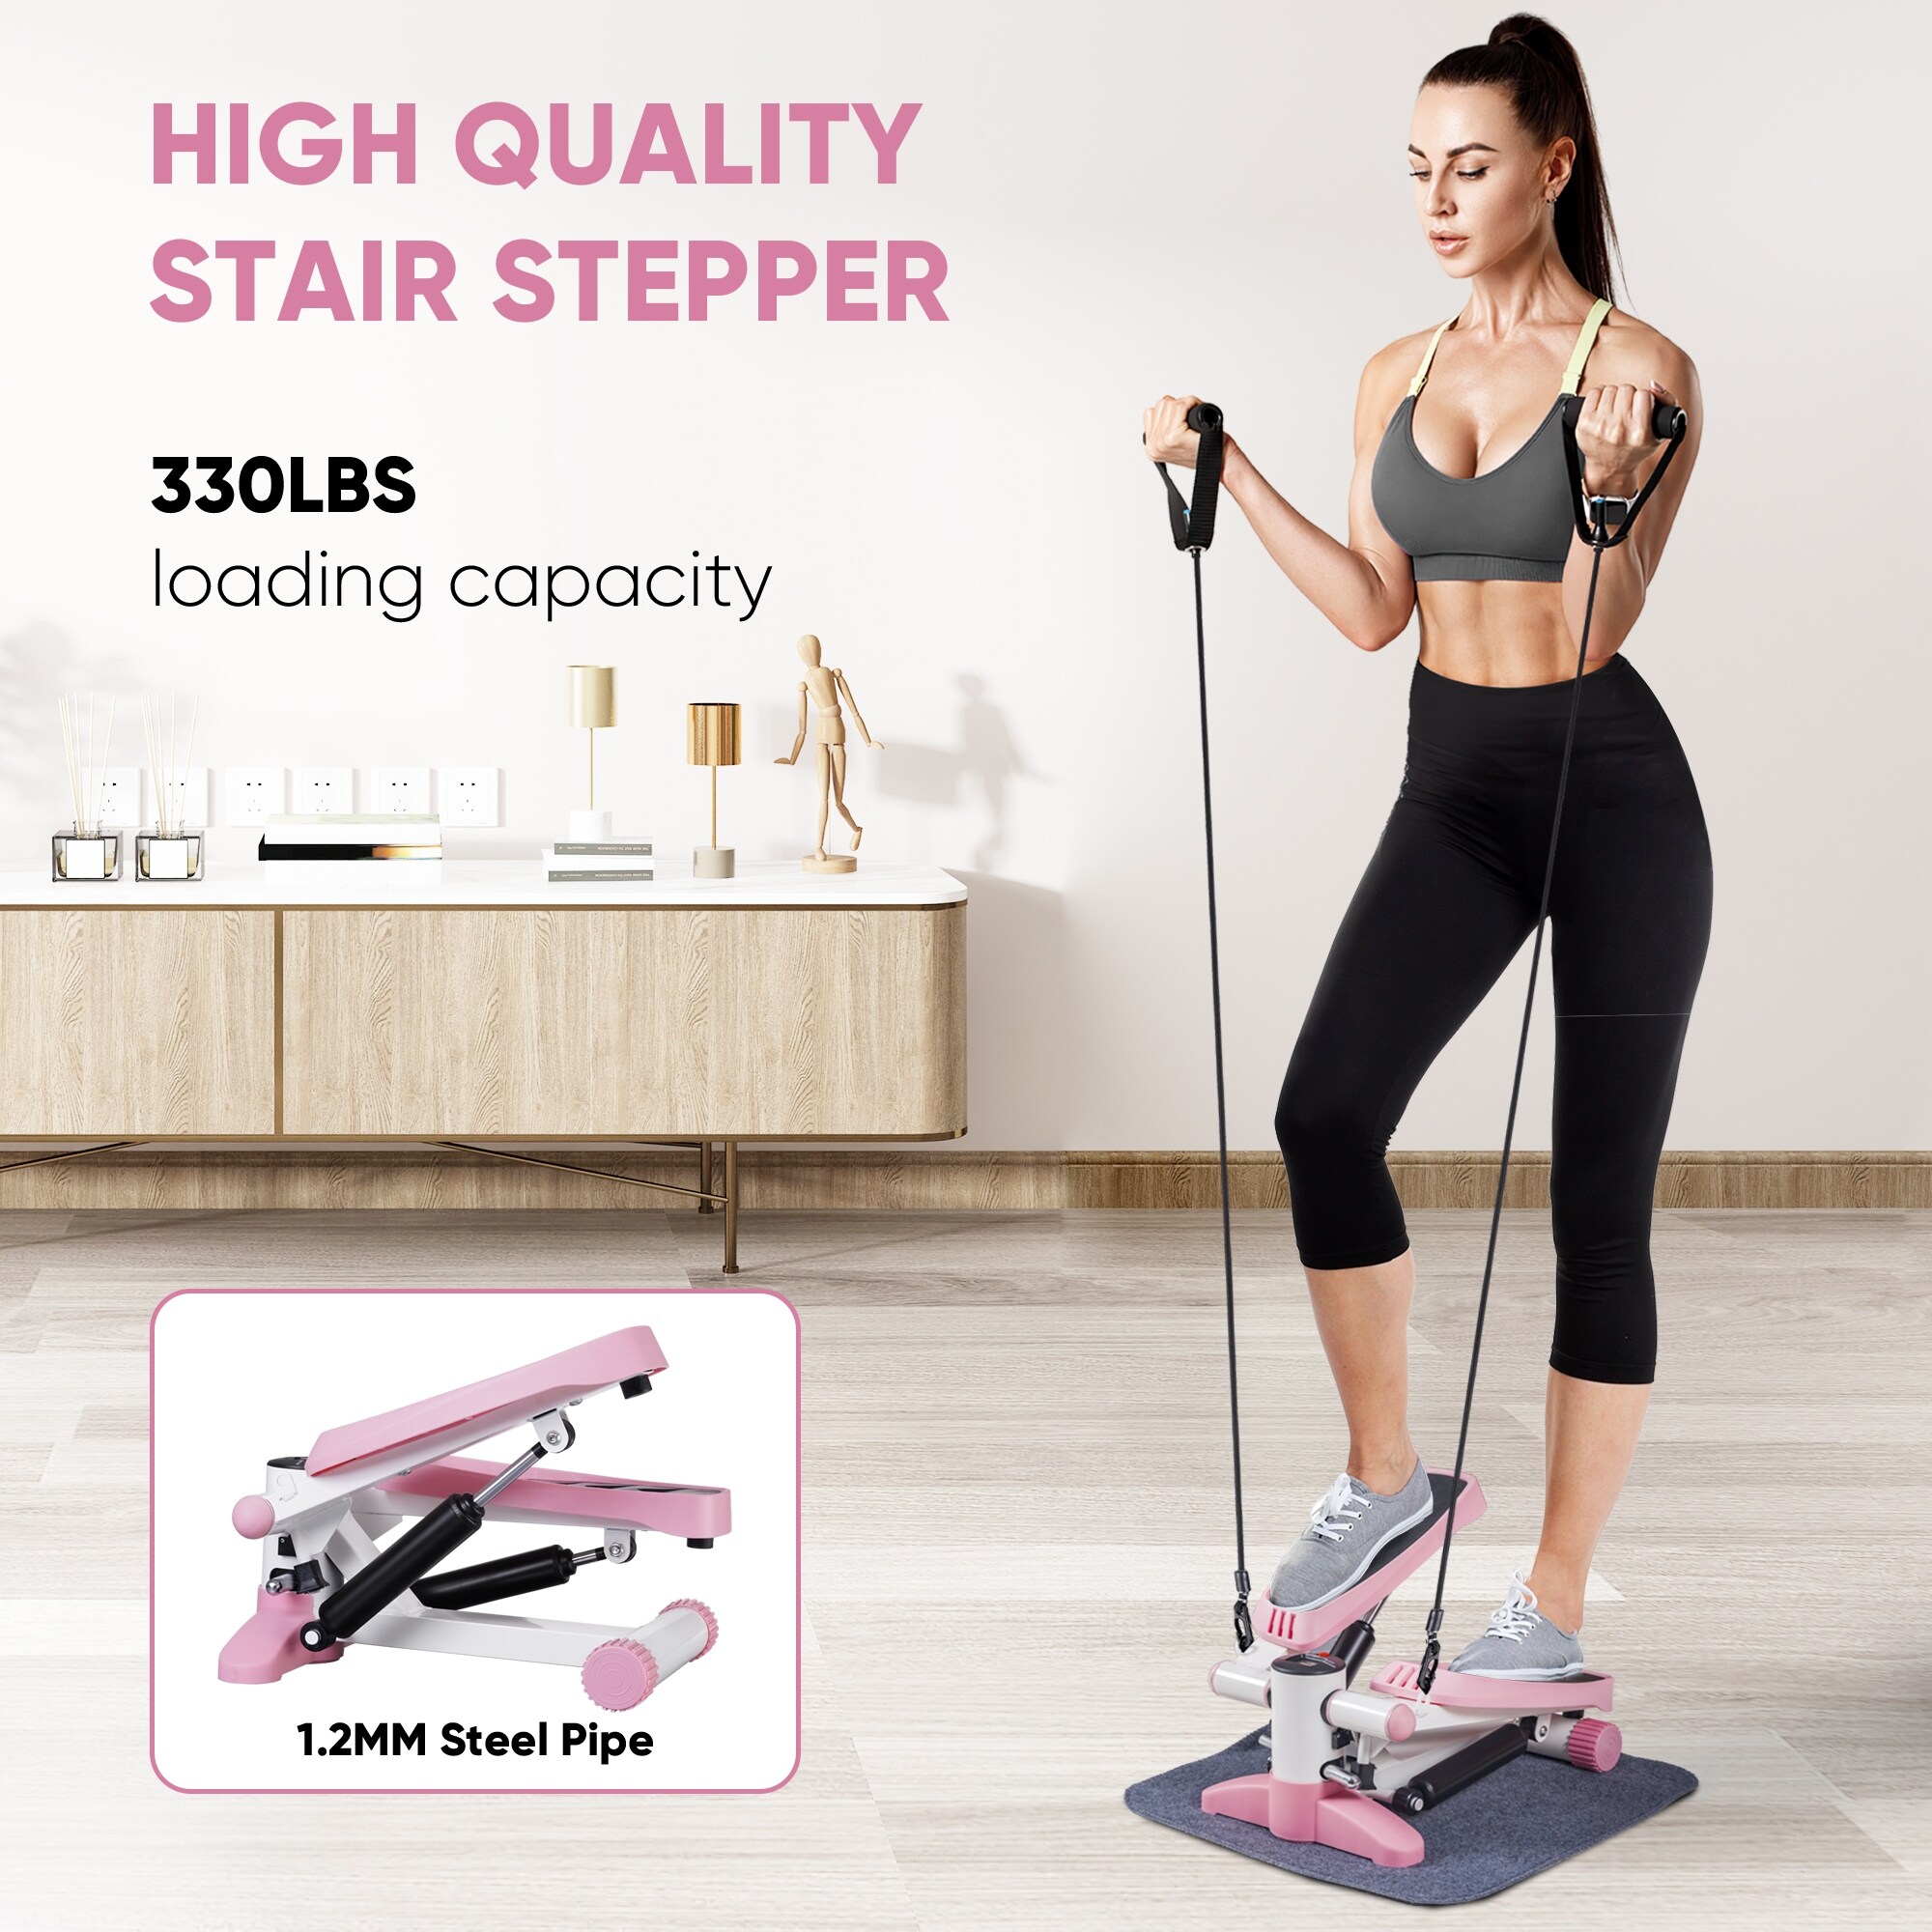 ZENOVA Mini Stair Stepper, Steppers for Exercise with Resistance Bands,  With 300 LBS Loading Capacity - Bed Bath & Beyond - 38336476